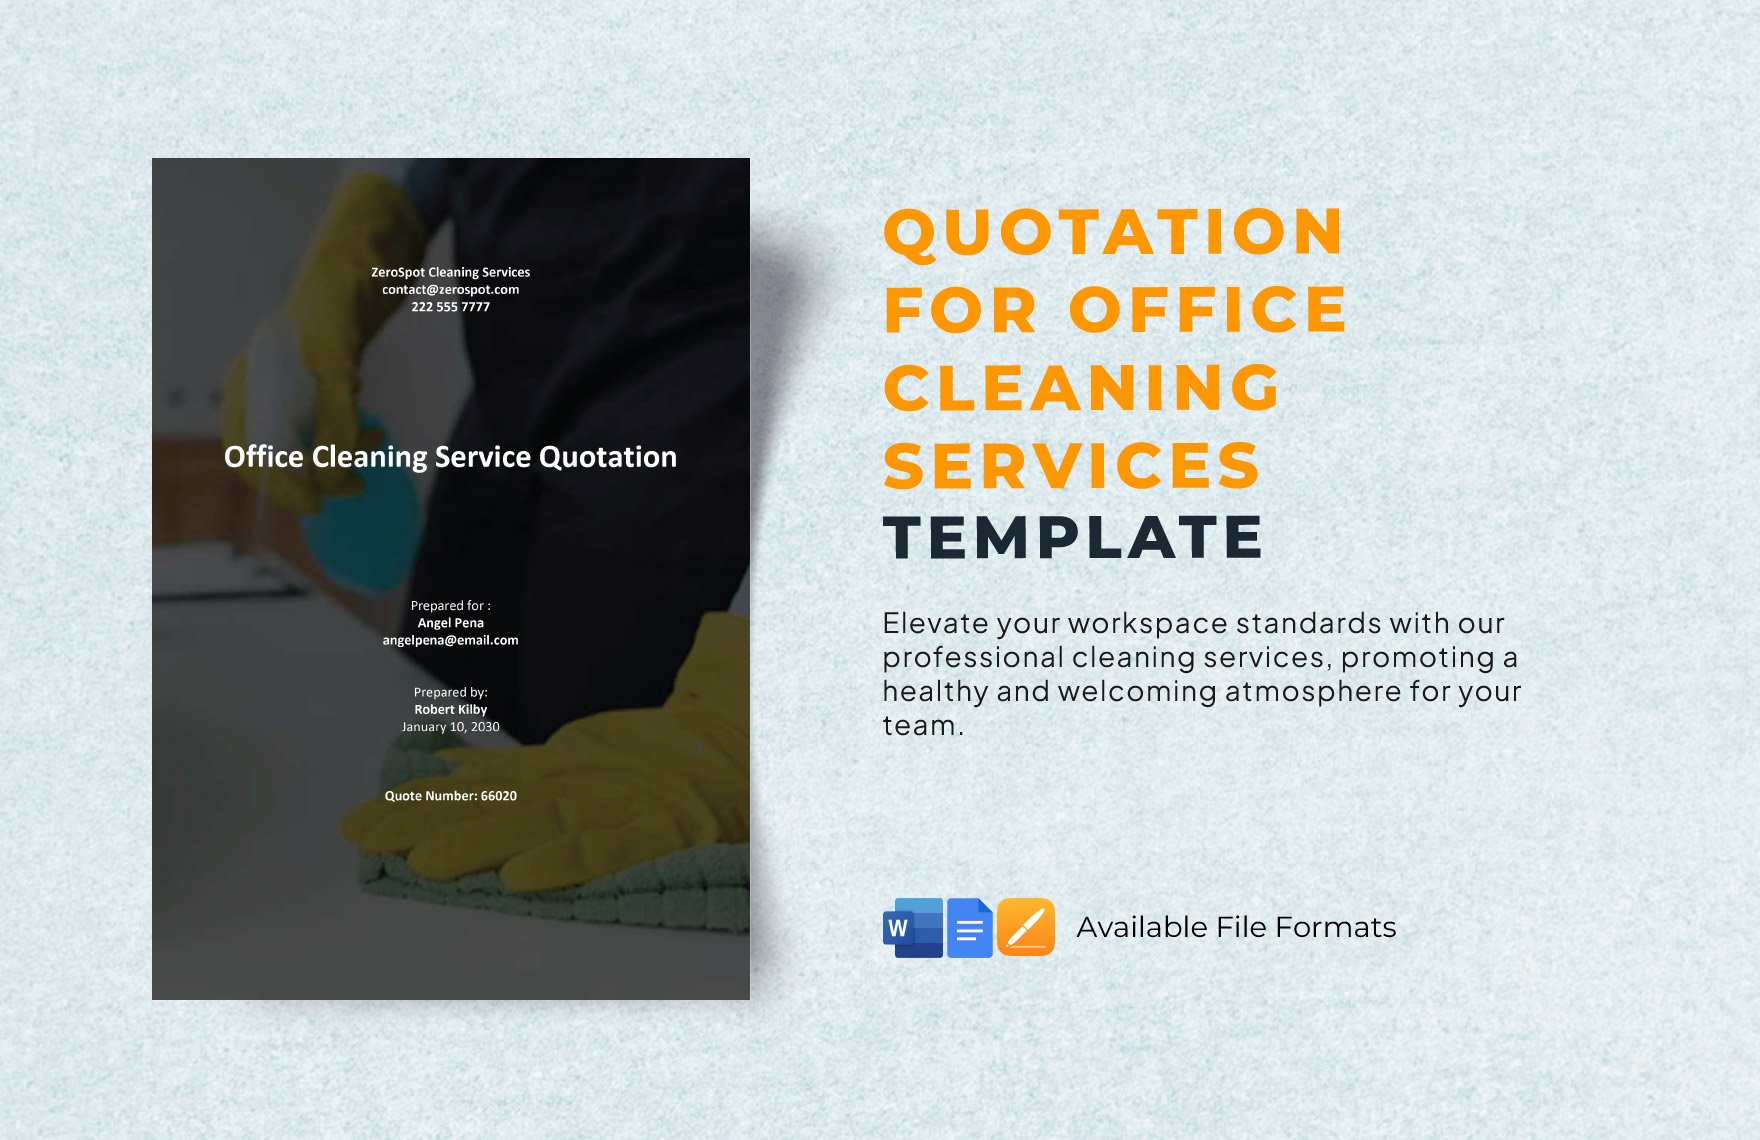 Quotation for Office Cleaning Services Template